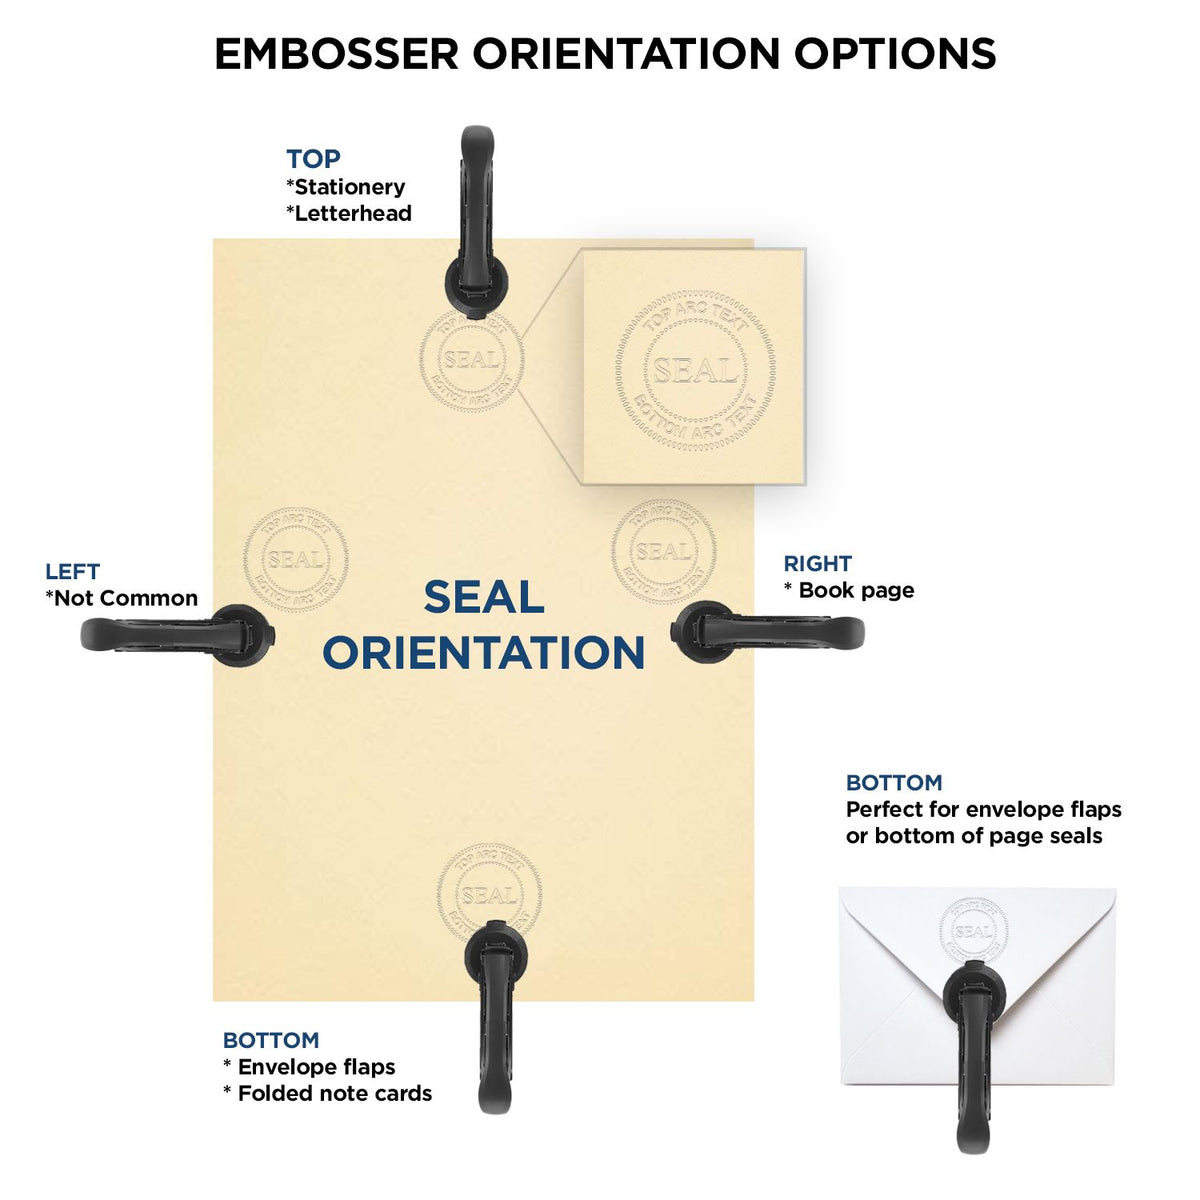 An infographic for the Heavy Duty Cast Iron Colorado Land Surveyor Seal Embosser showing embosser orientation, this is showing examples of a top, bottom, right and left insert.